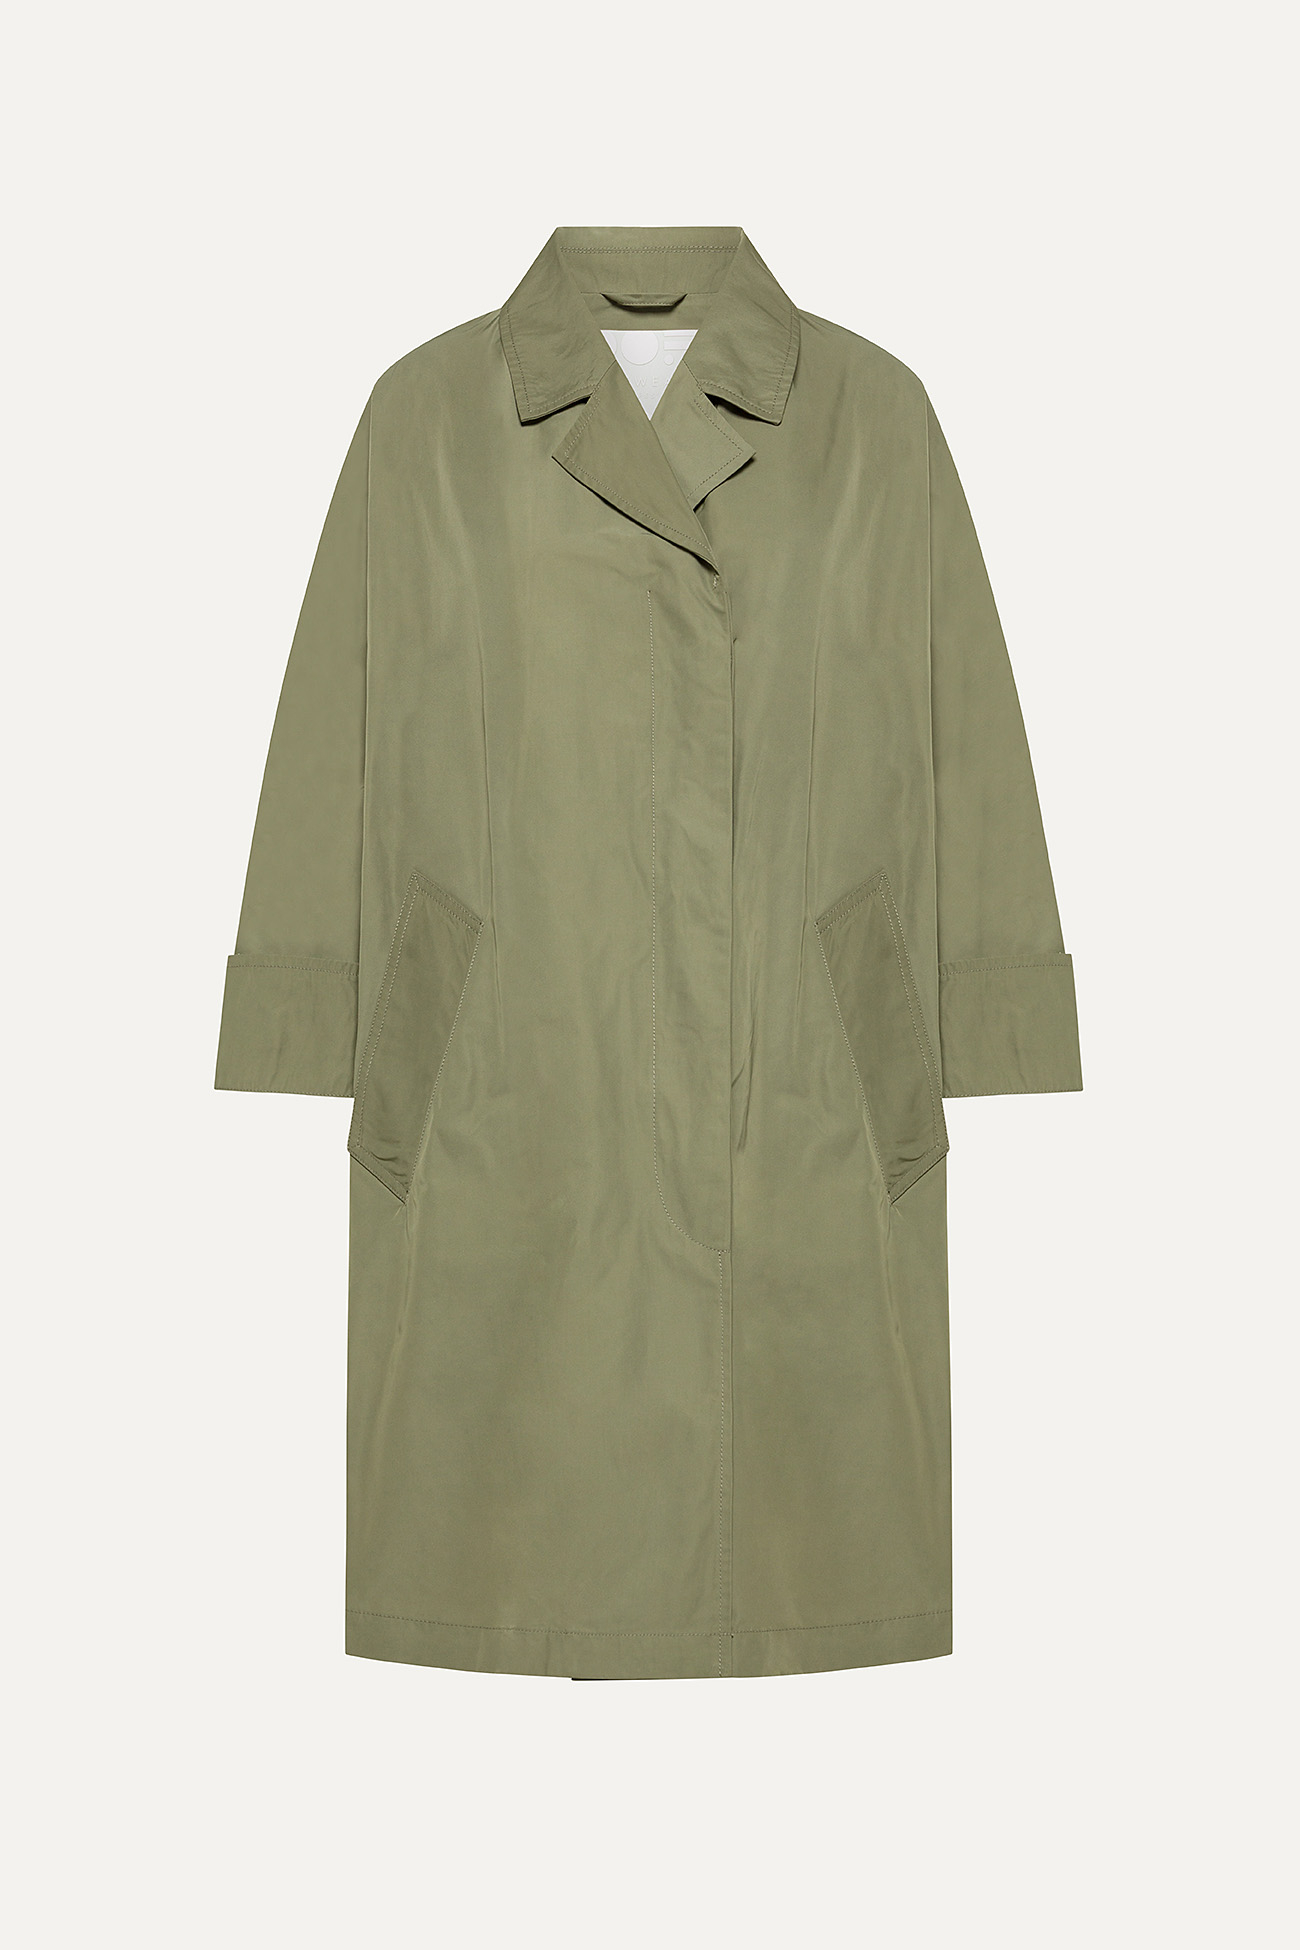 MEMORY NYLON TRENCH COAT 9138 - CAMOUFLAGE GREEN - OOF WEAR